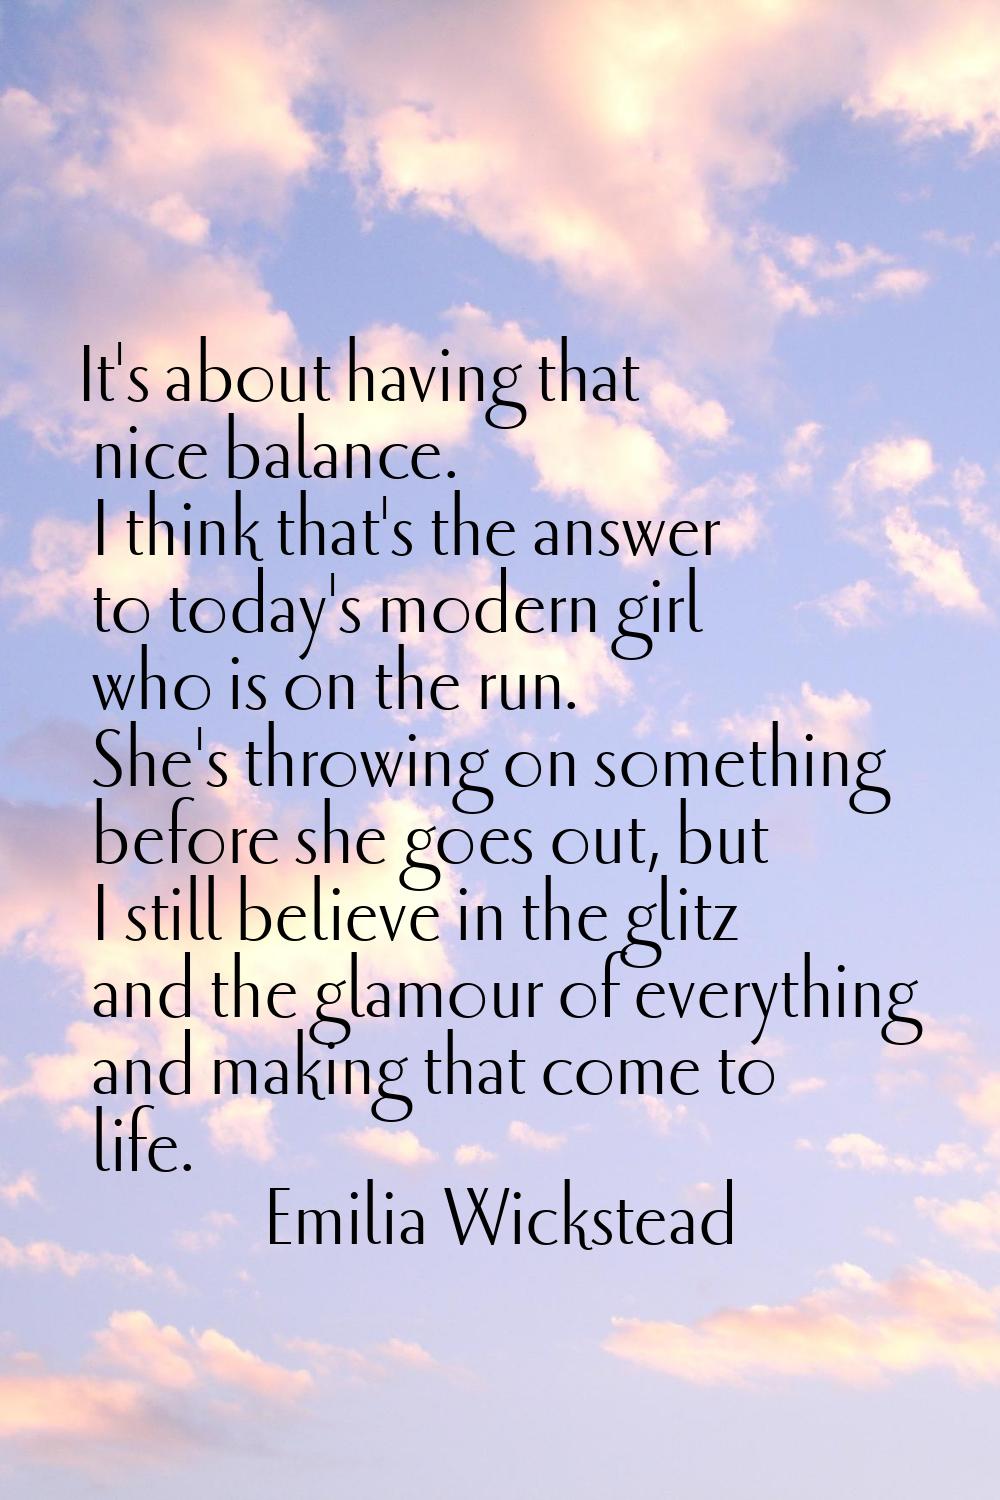 It's about having that nice balance. I think that's the answer to today's modern girl who is on the